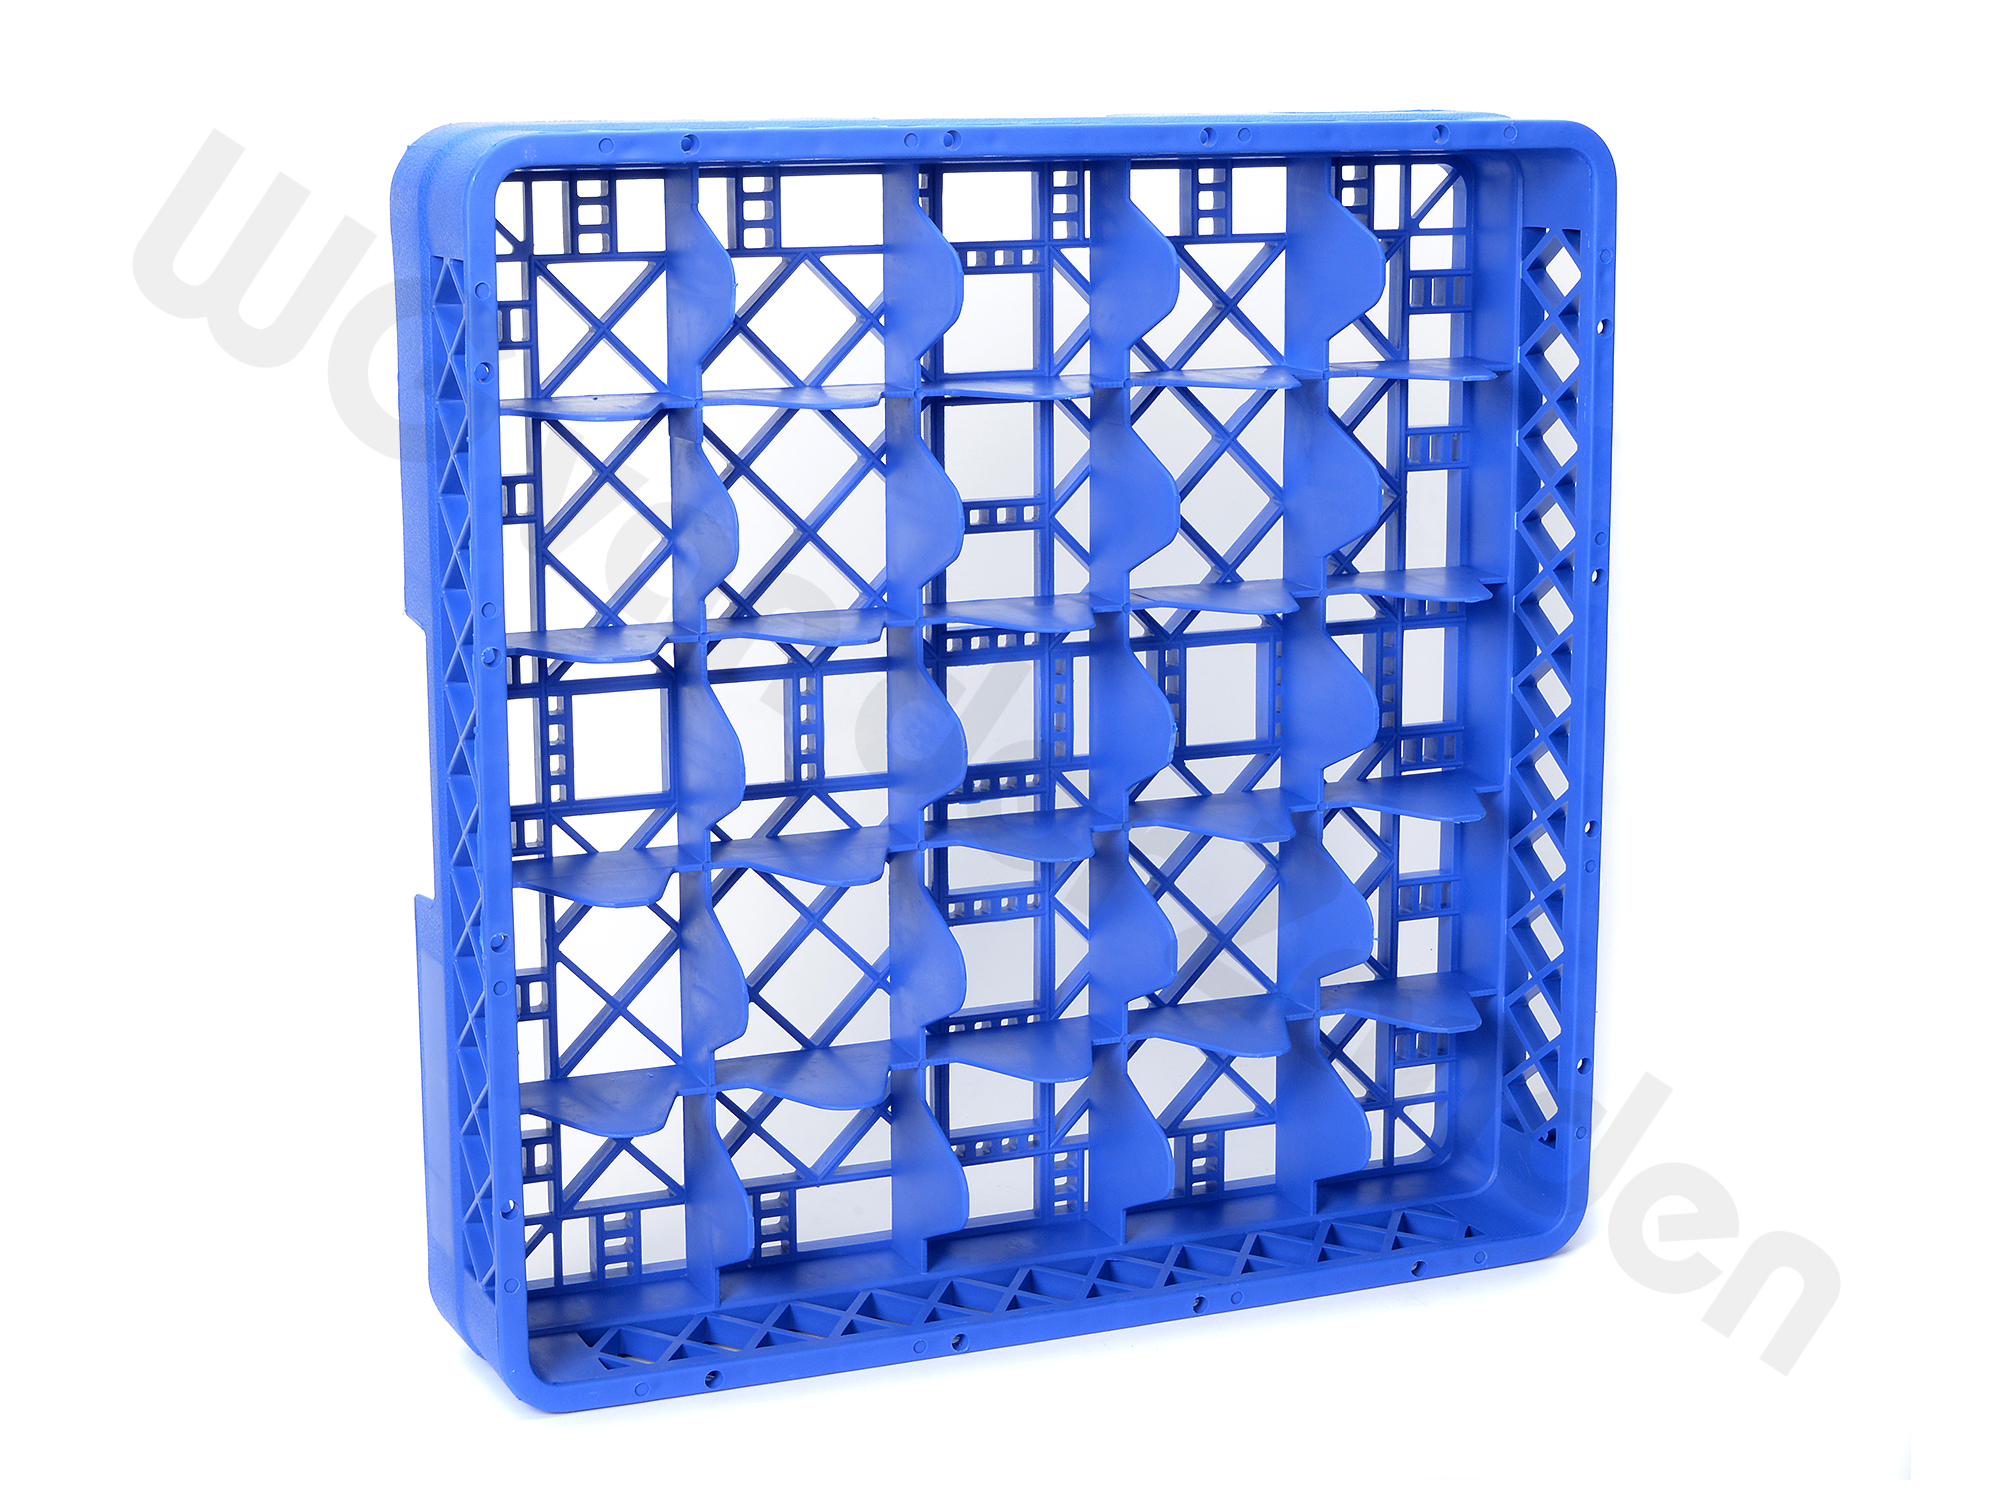 210981 DISHWASHING RACK FOR CUPS 25 COMPART.